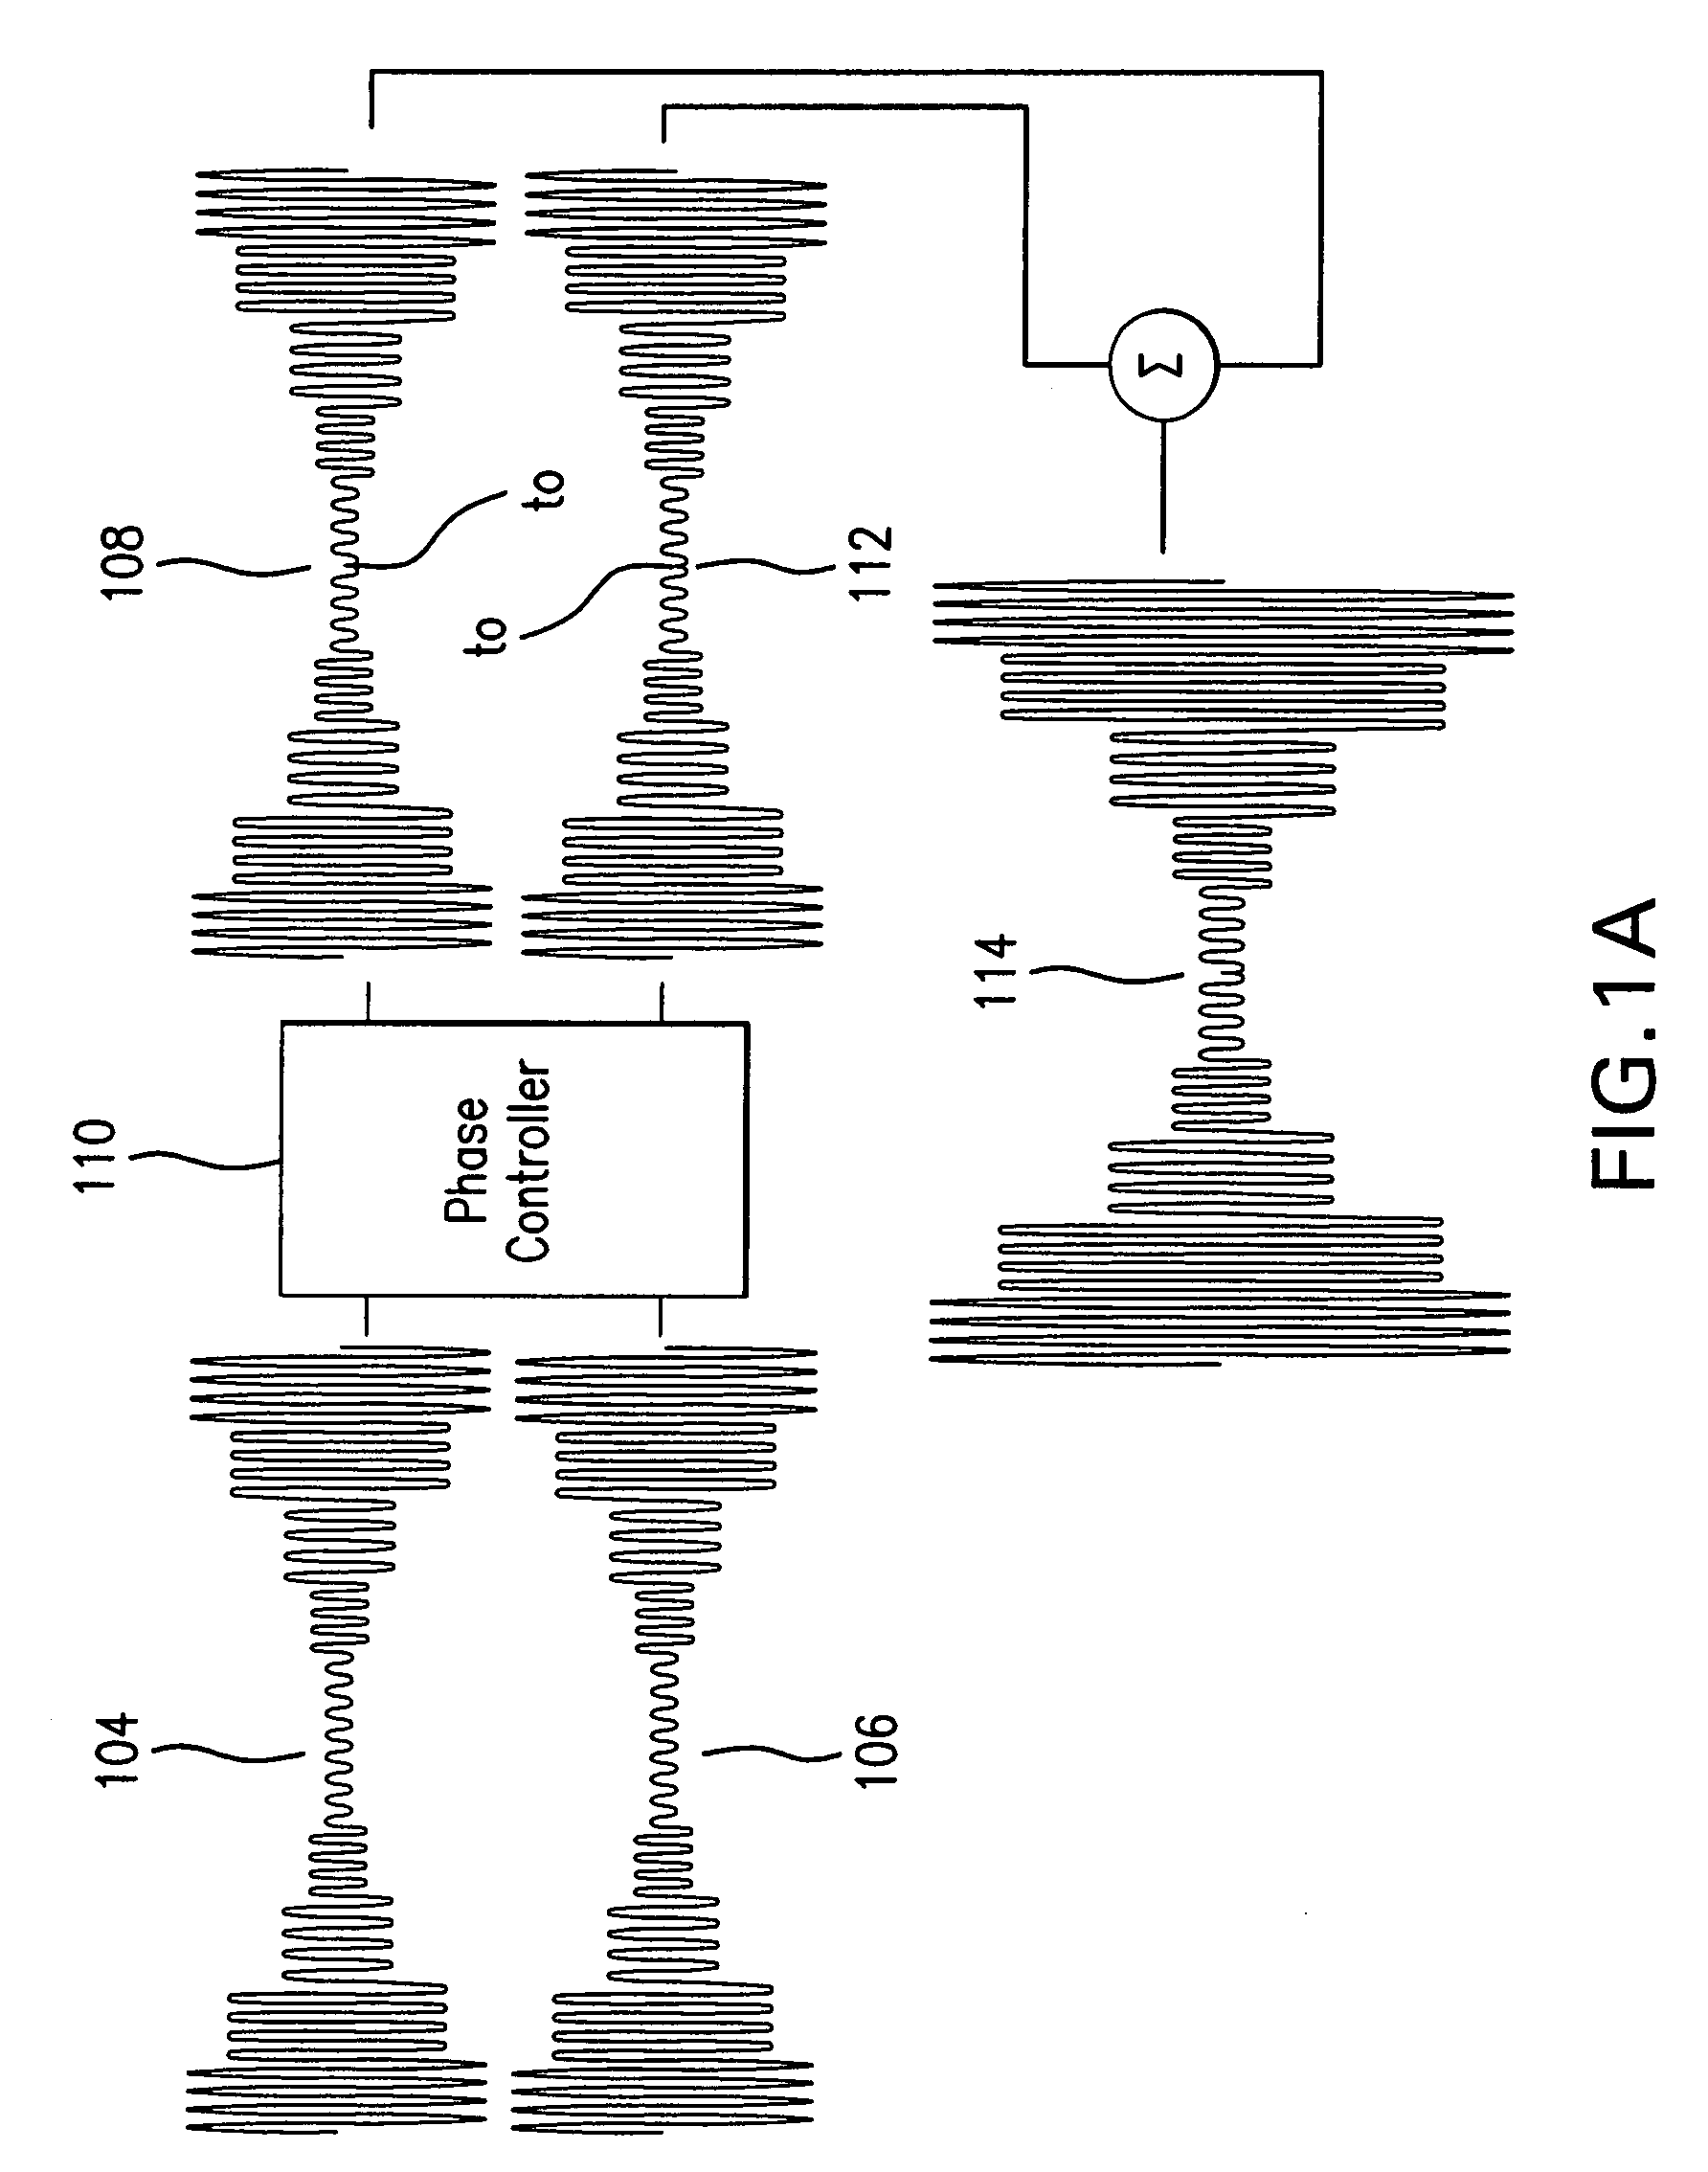 Systems and methods of RF power transmission, modulation, and amplification, including embodiments for compensating for waveform distortion